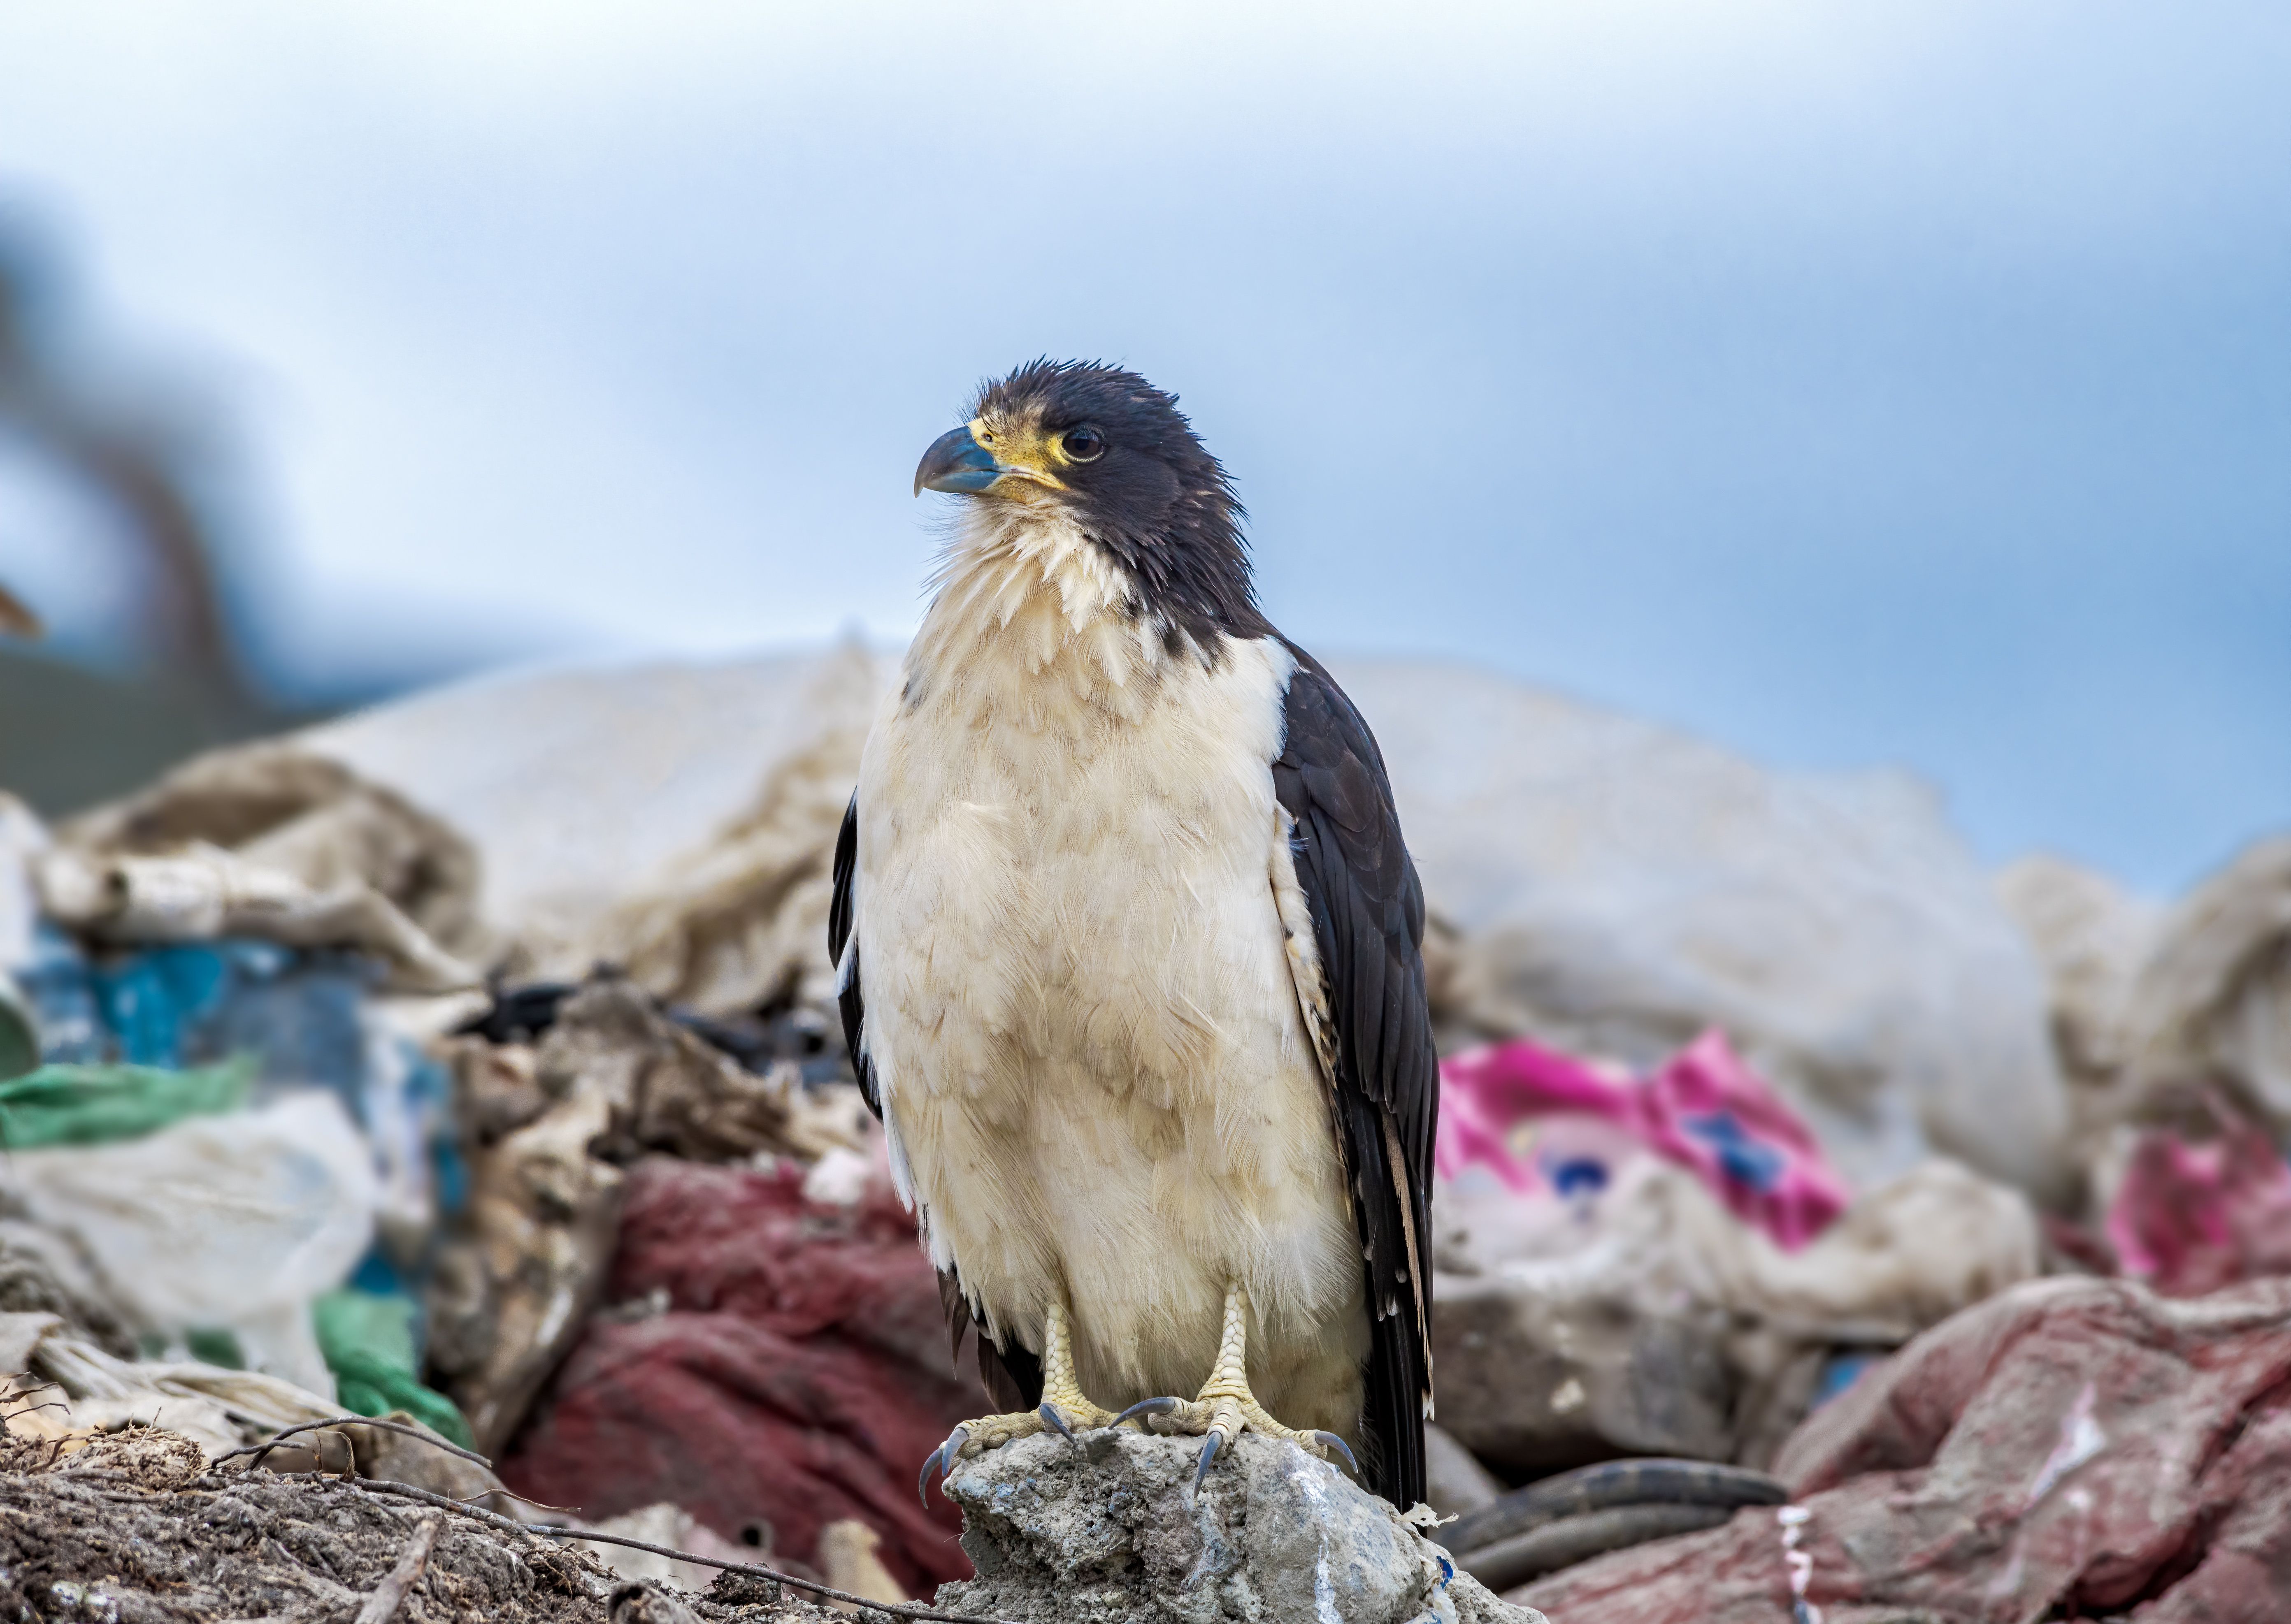 A white-throated Caracara (bird with white belly and dark feathers on wings and head) stands atop trash in the Ushuaia landfill, Argentina.